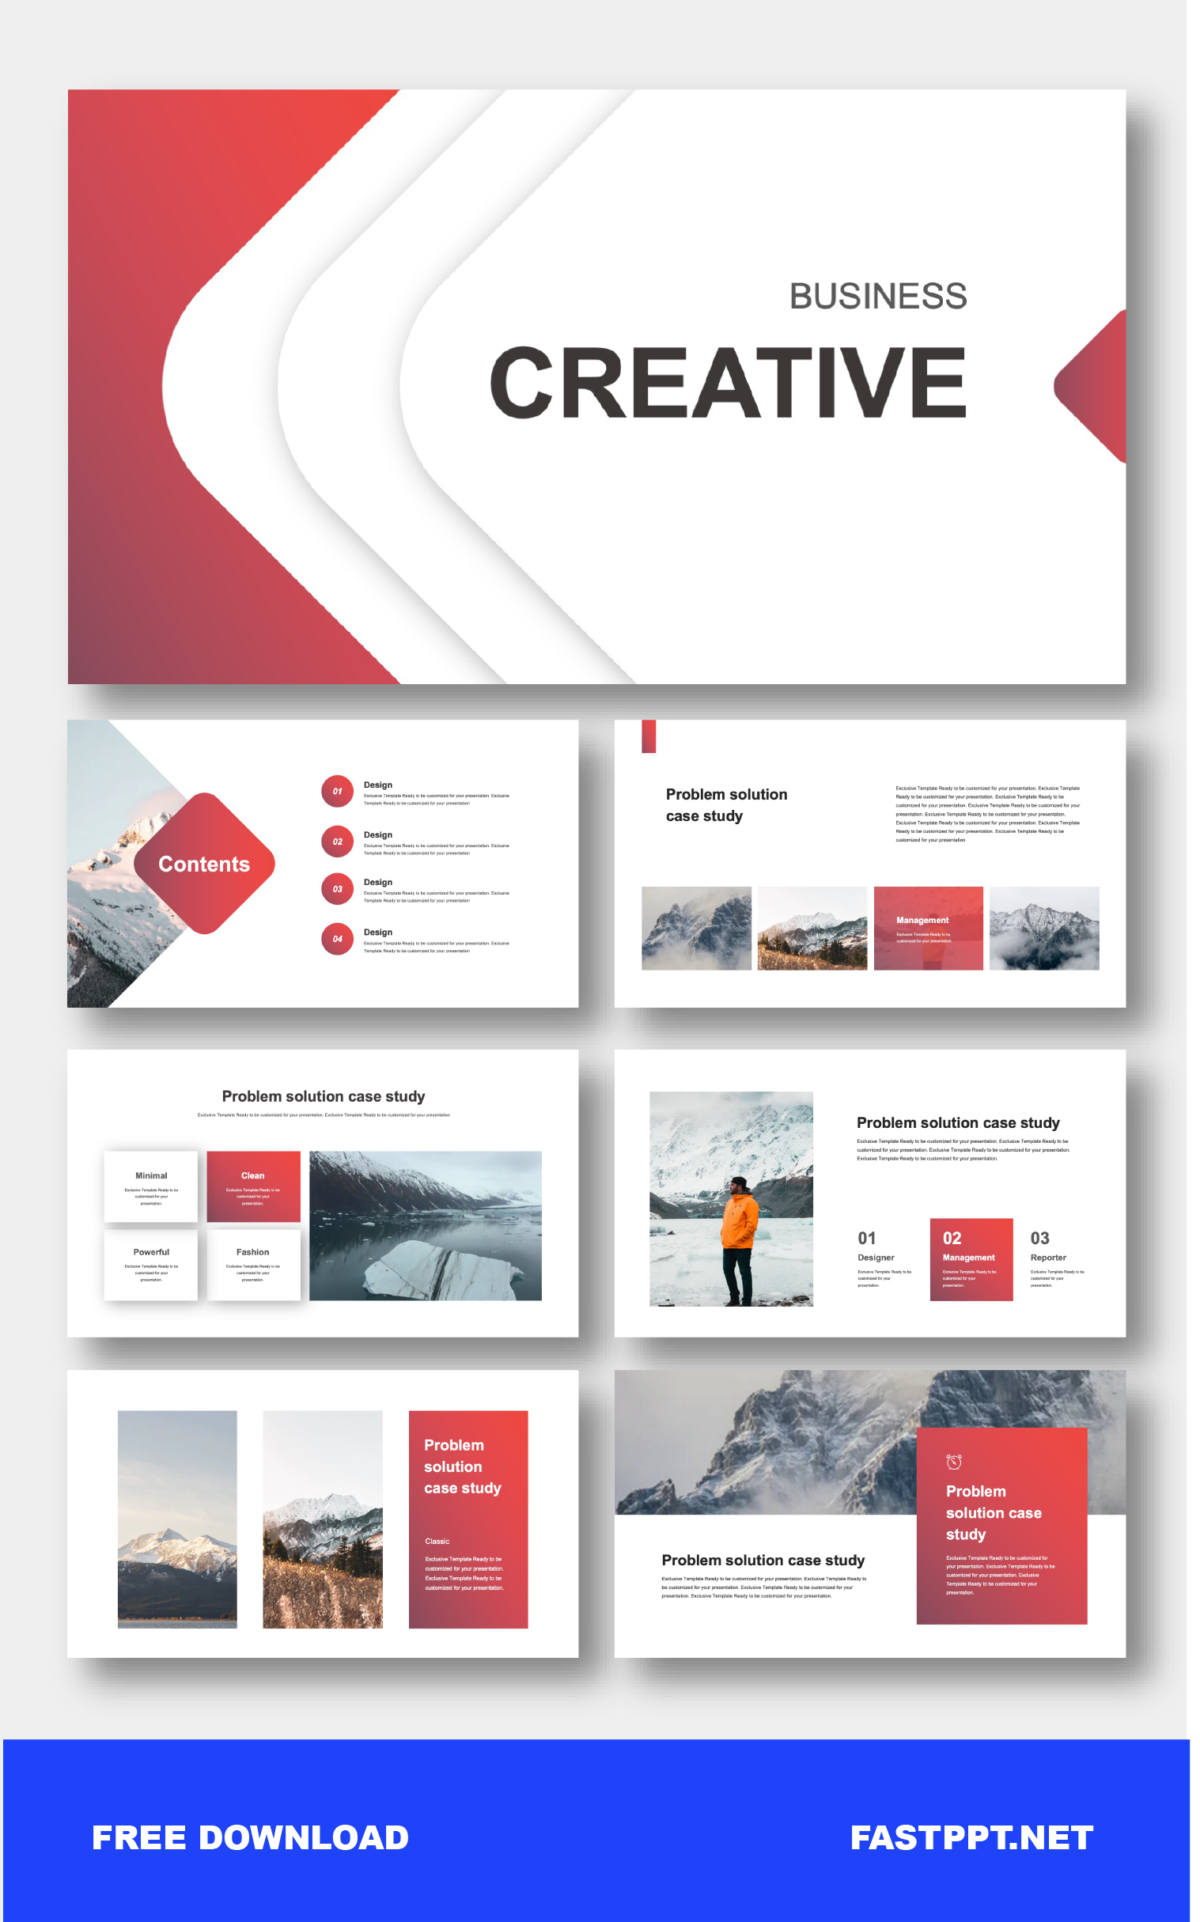 FREE TRIAL-Google Slides-Beautiful Red Business Creative Presentation ...